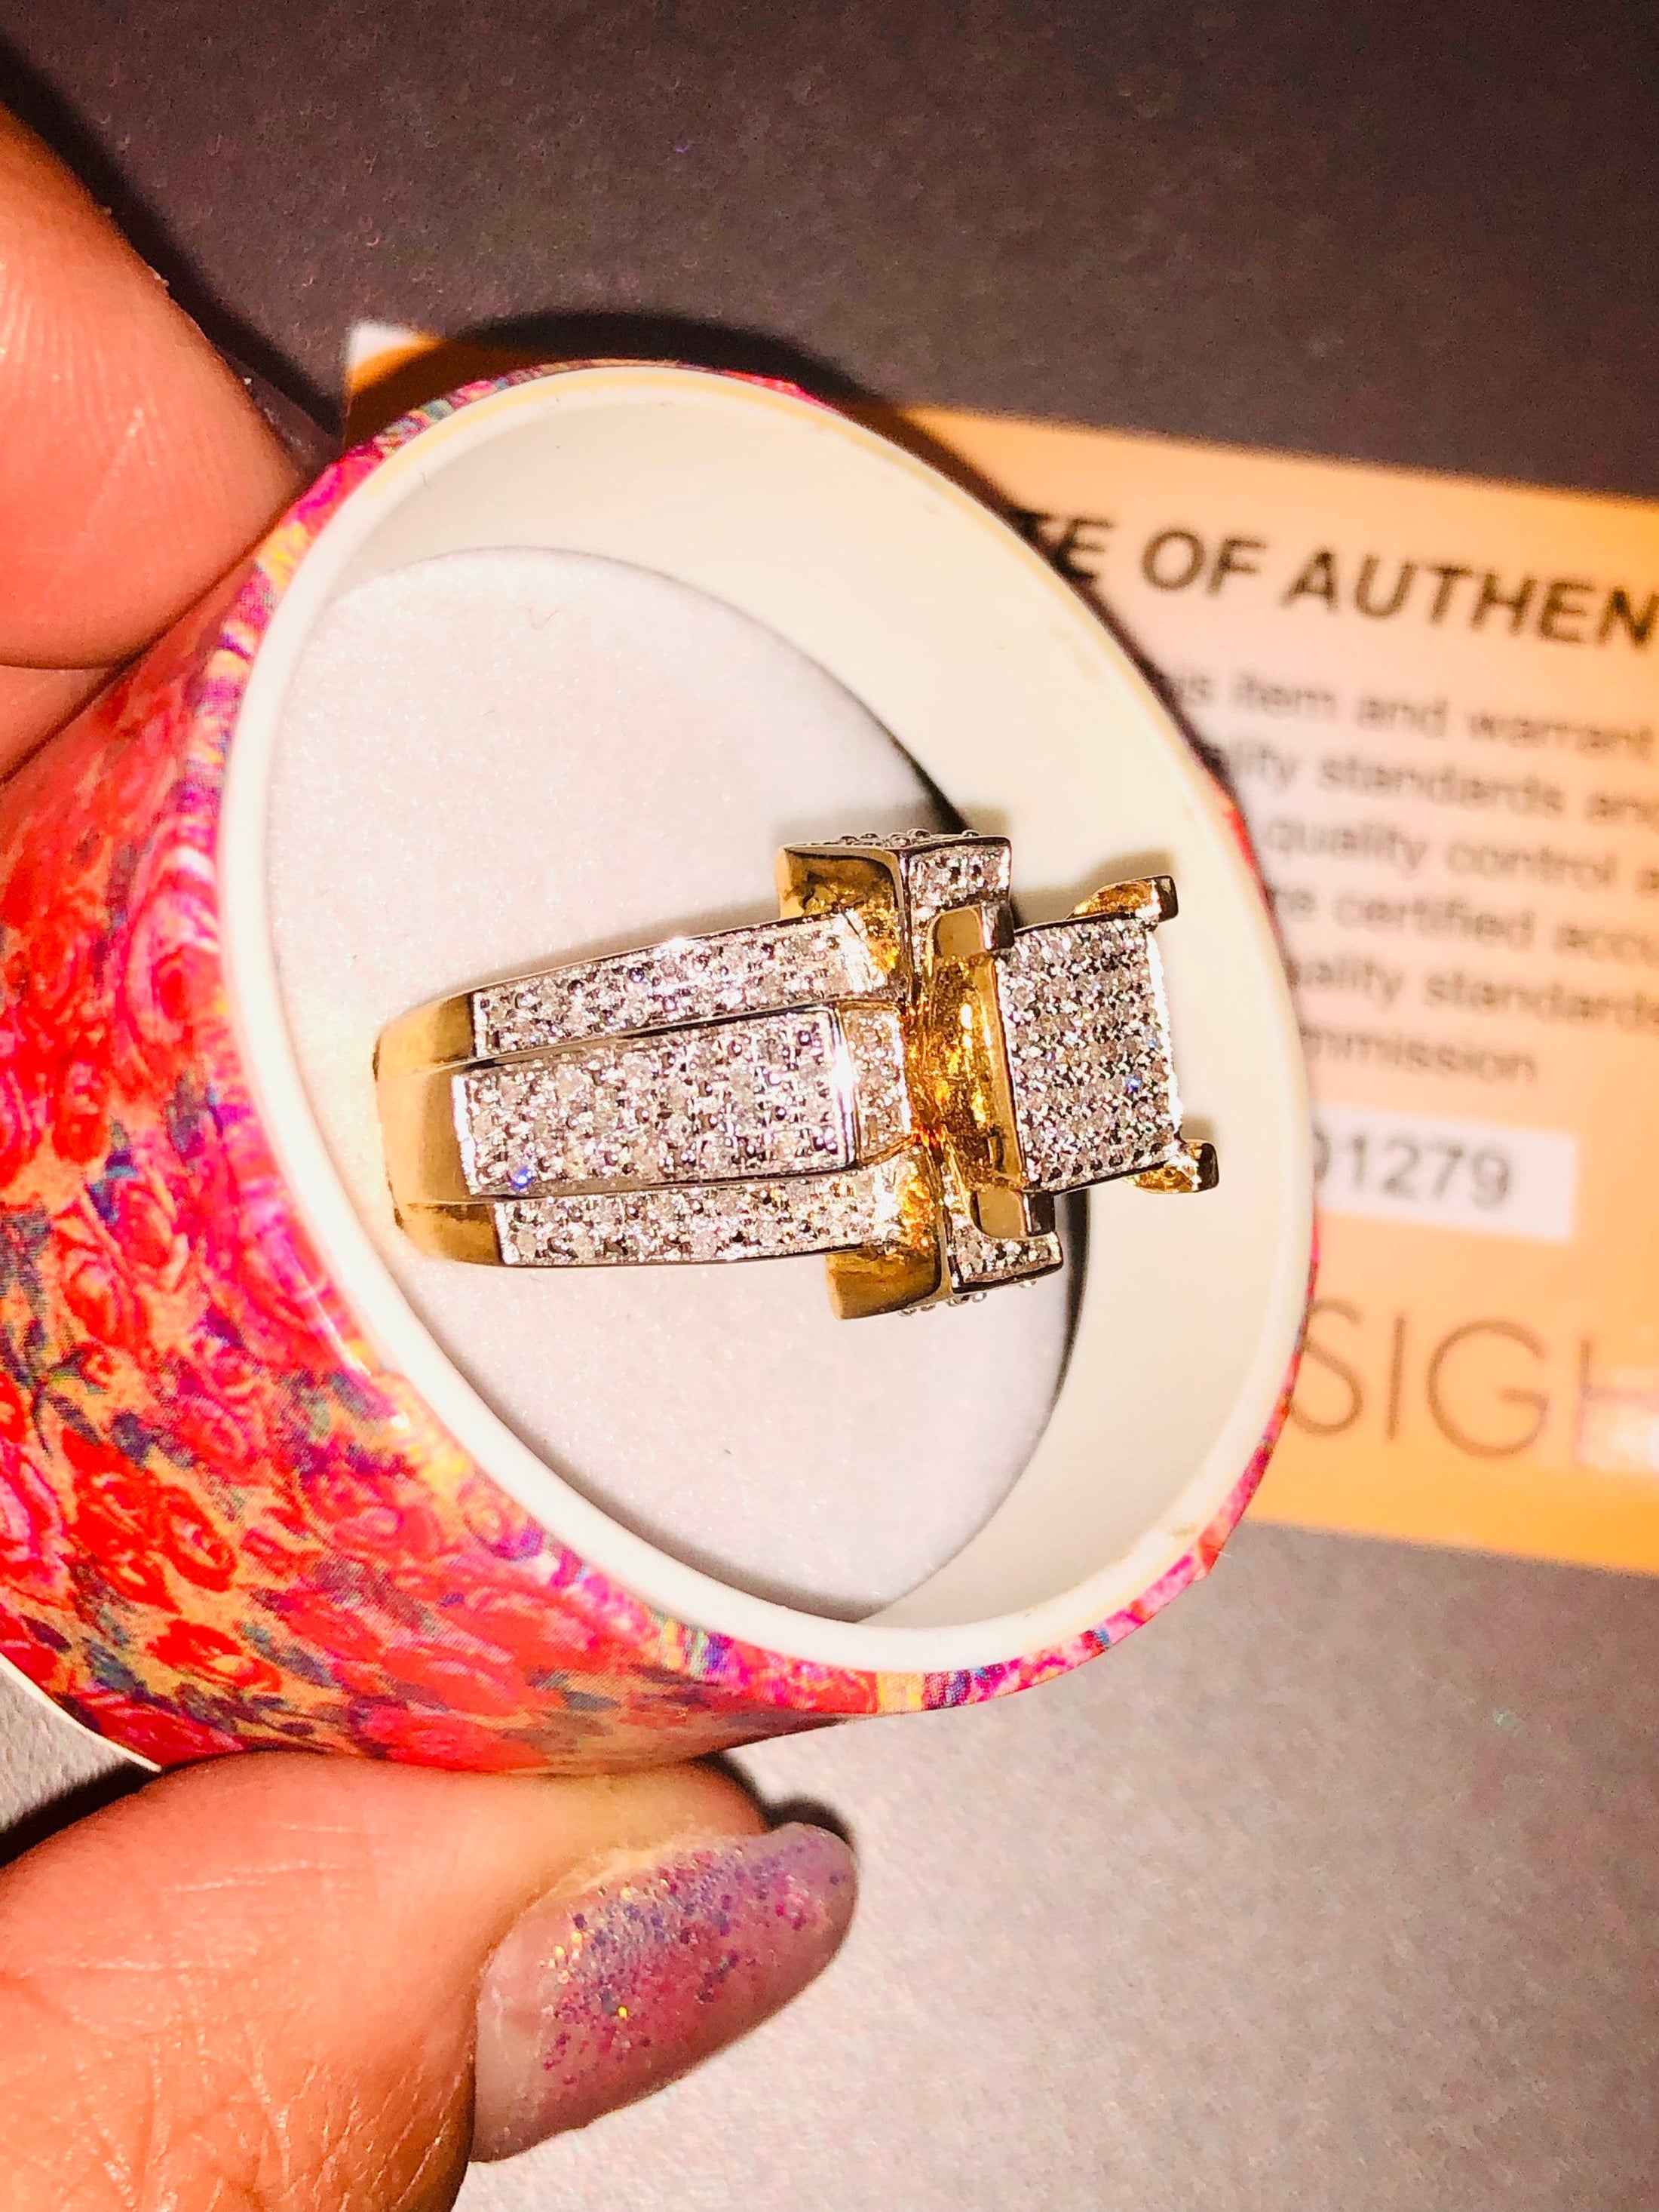 Wow! Huge cyber blowout sale! Custom designed natural genuine real diamond women ring .80ct not CZ designed in Dubai! Authenticity incl.